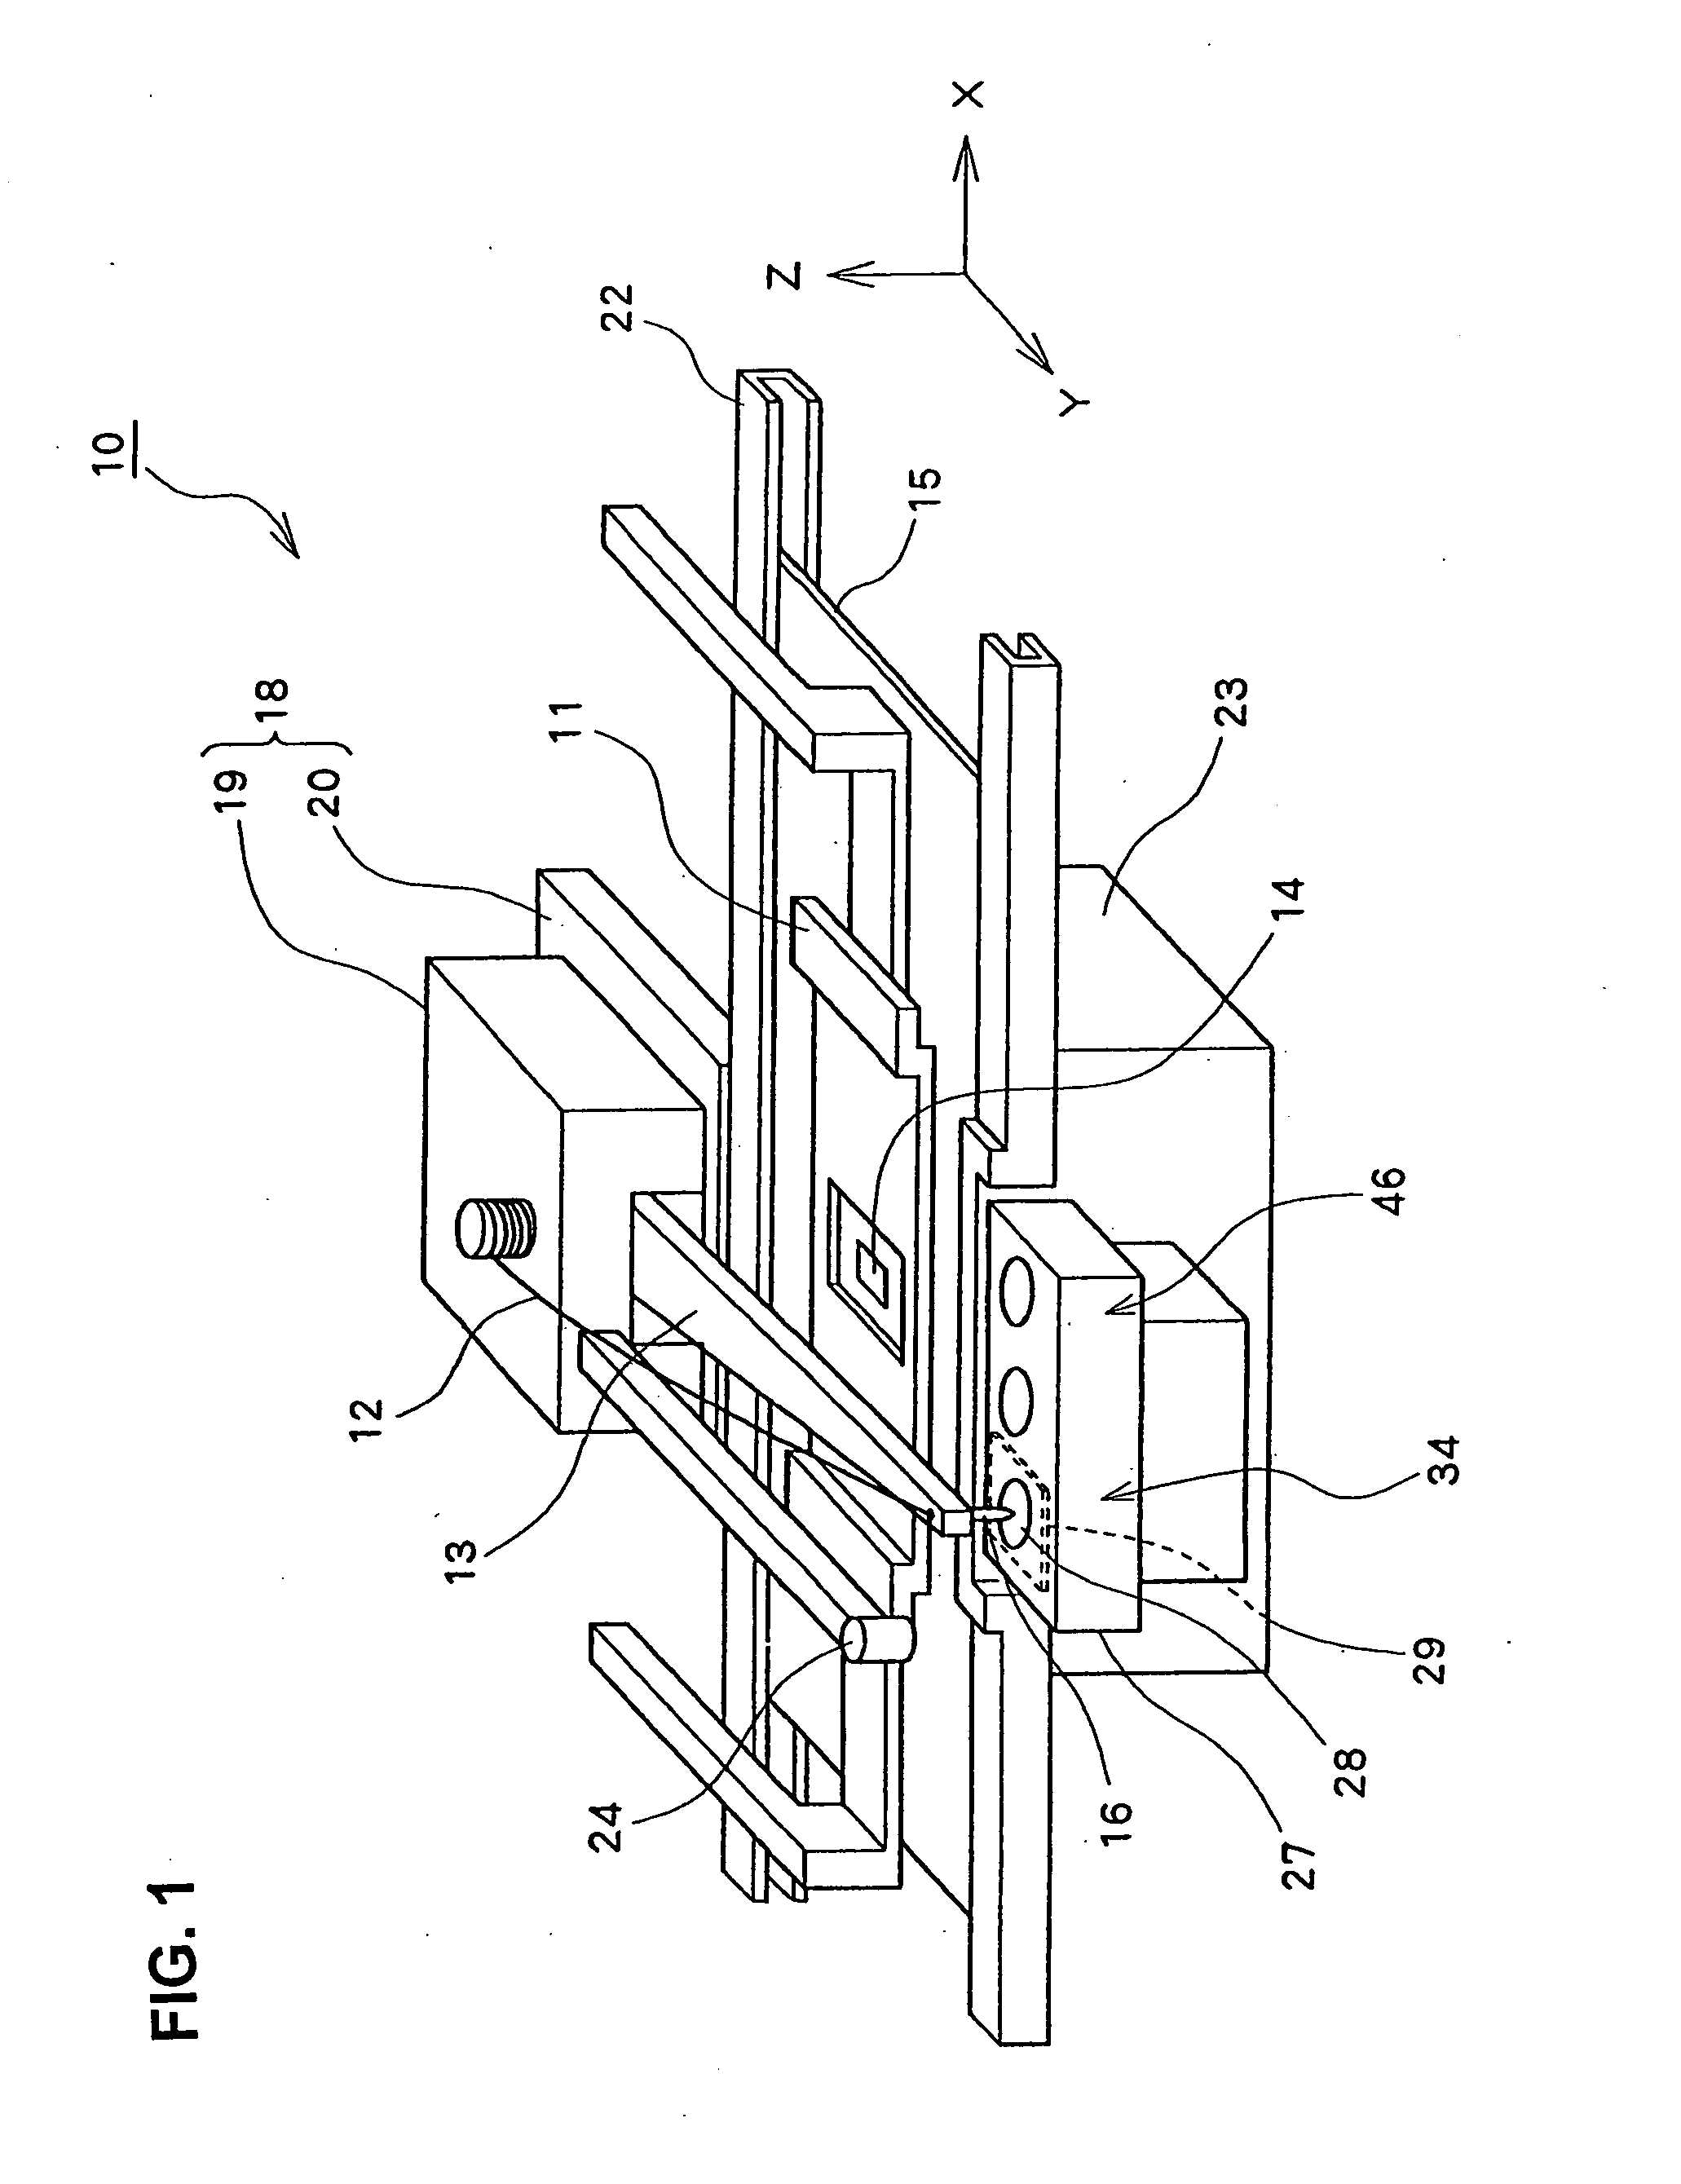 Bonding apparatus and method for cleaning tip of a bonding tool